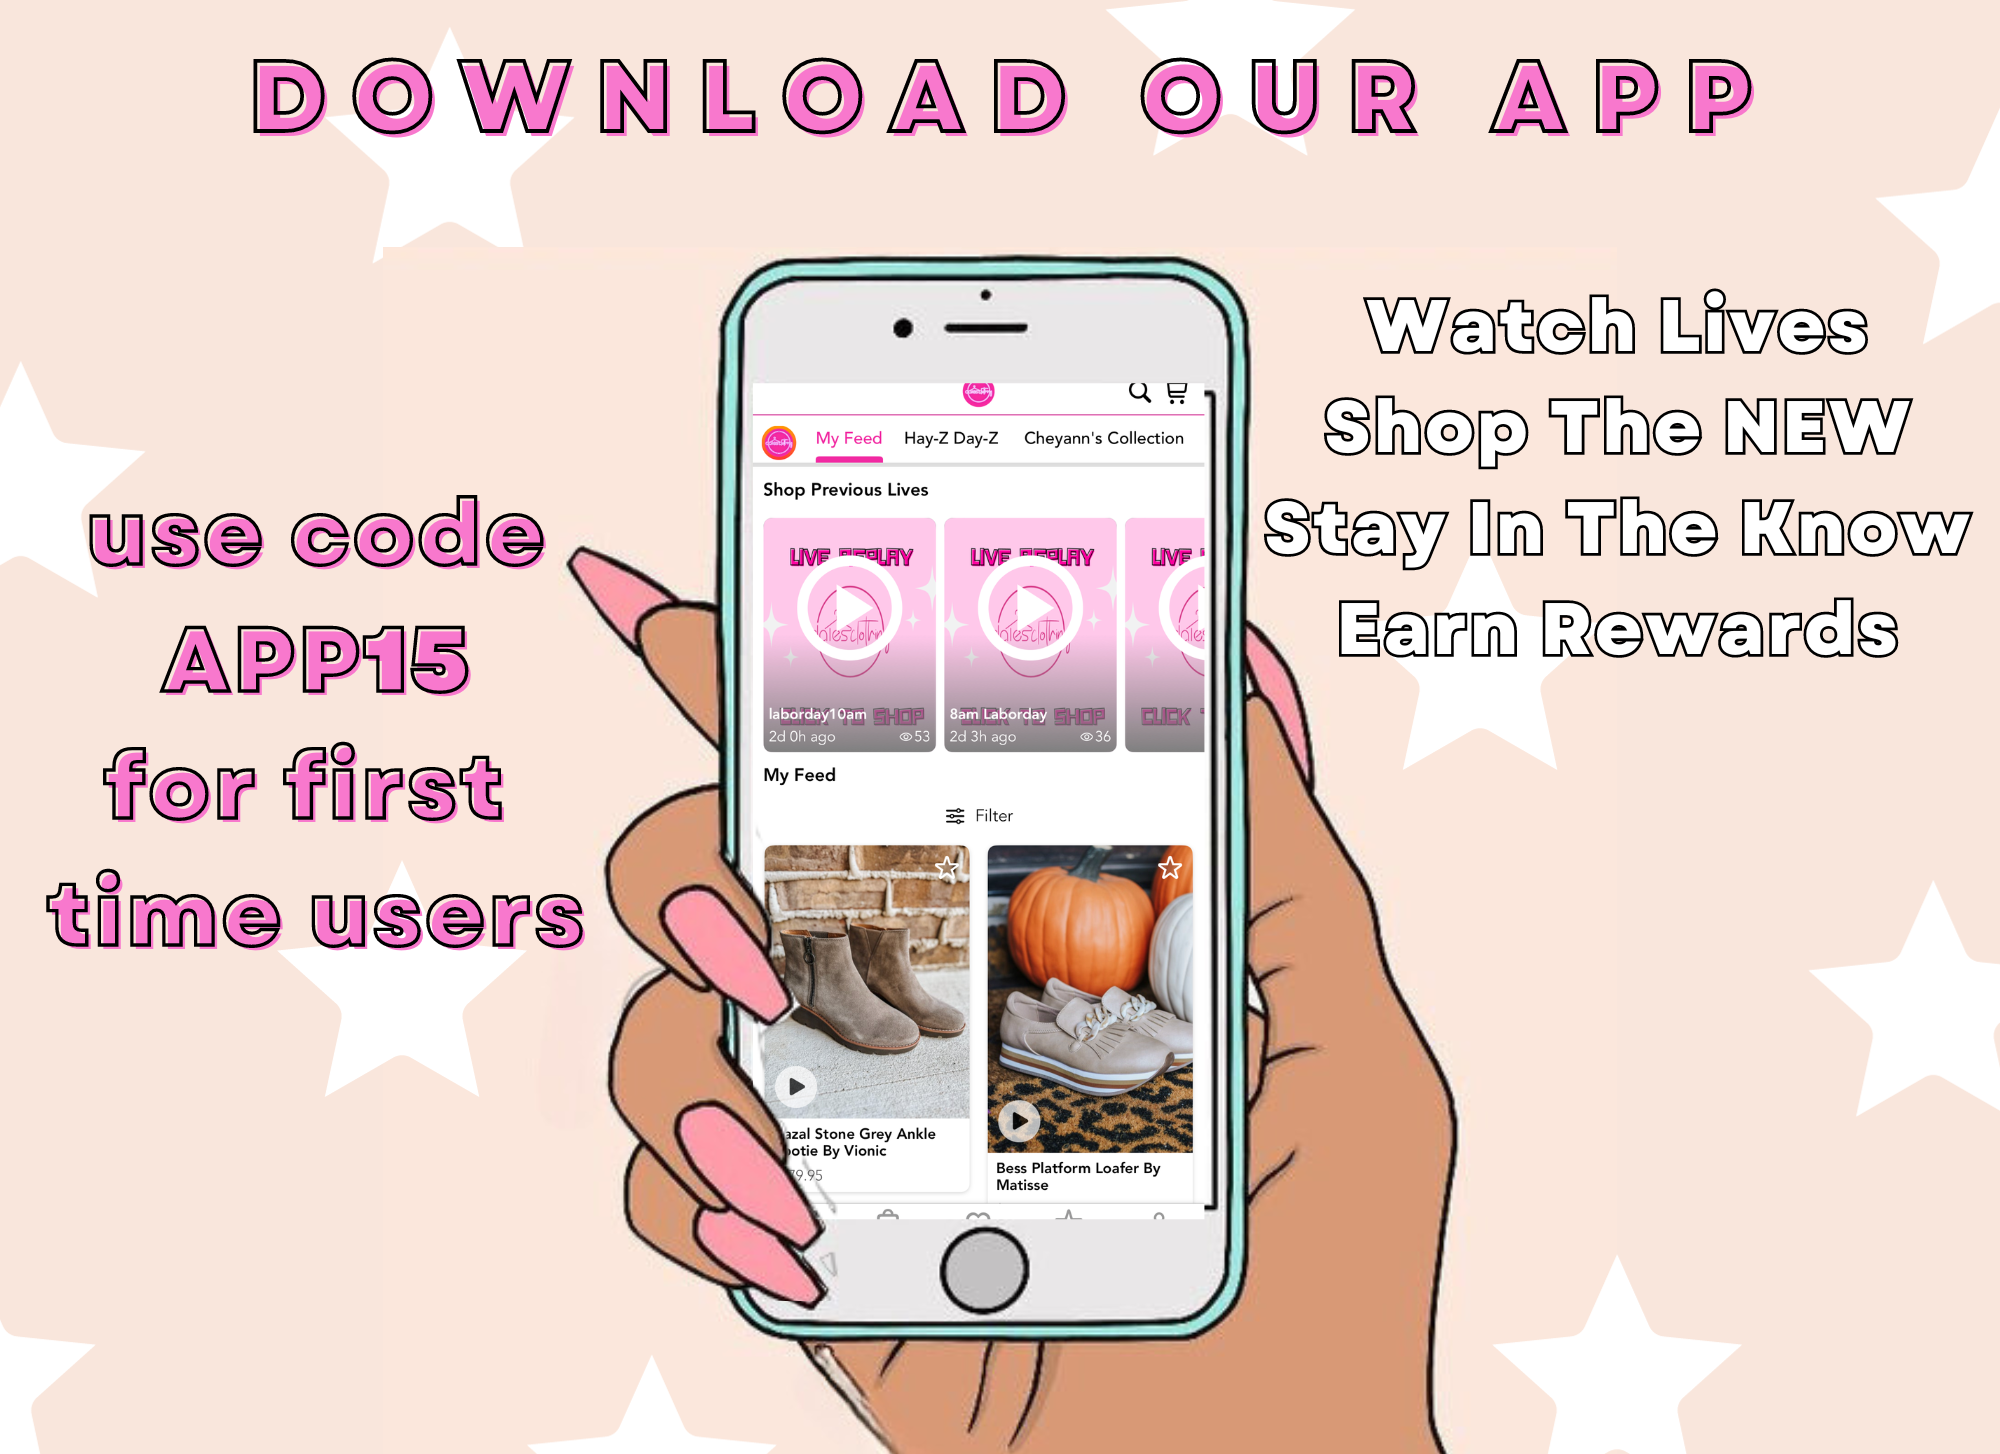 download our app. use code APP15 for first time users.